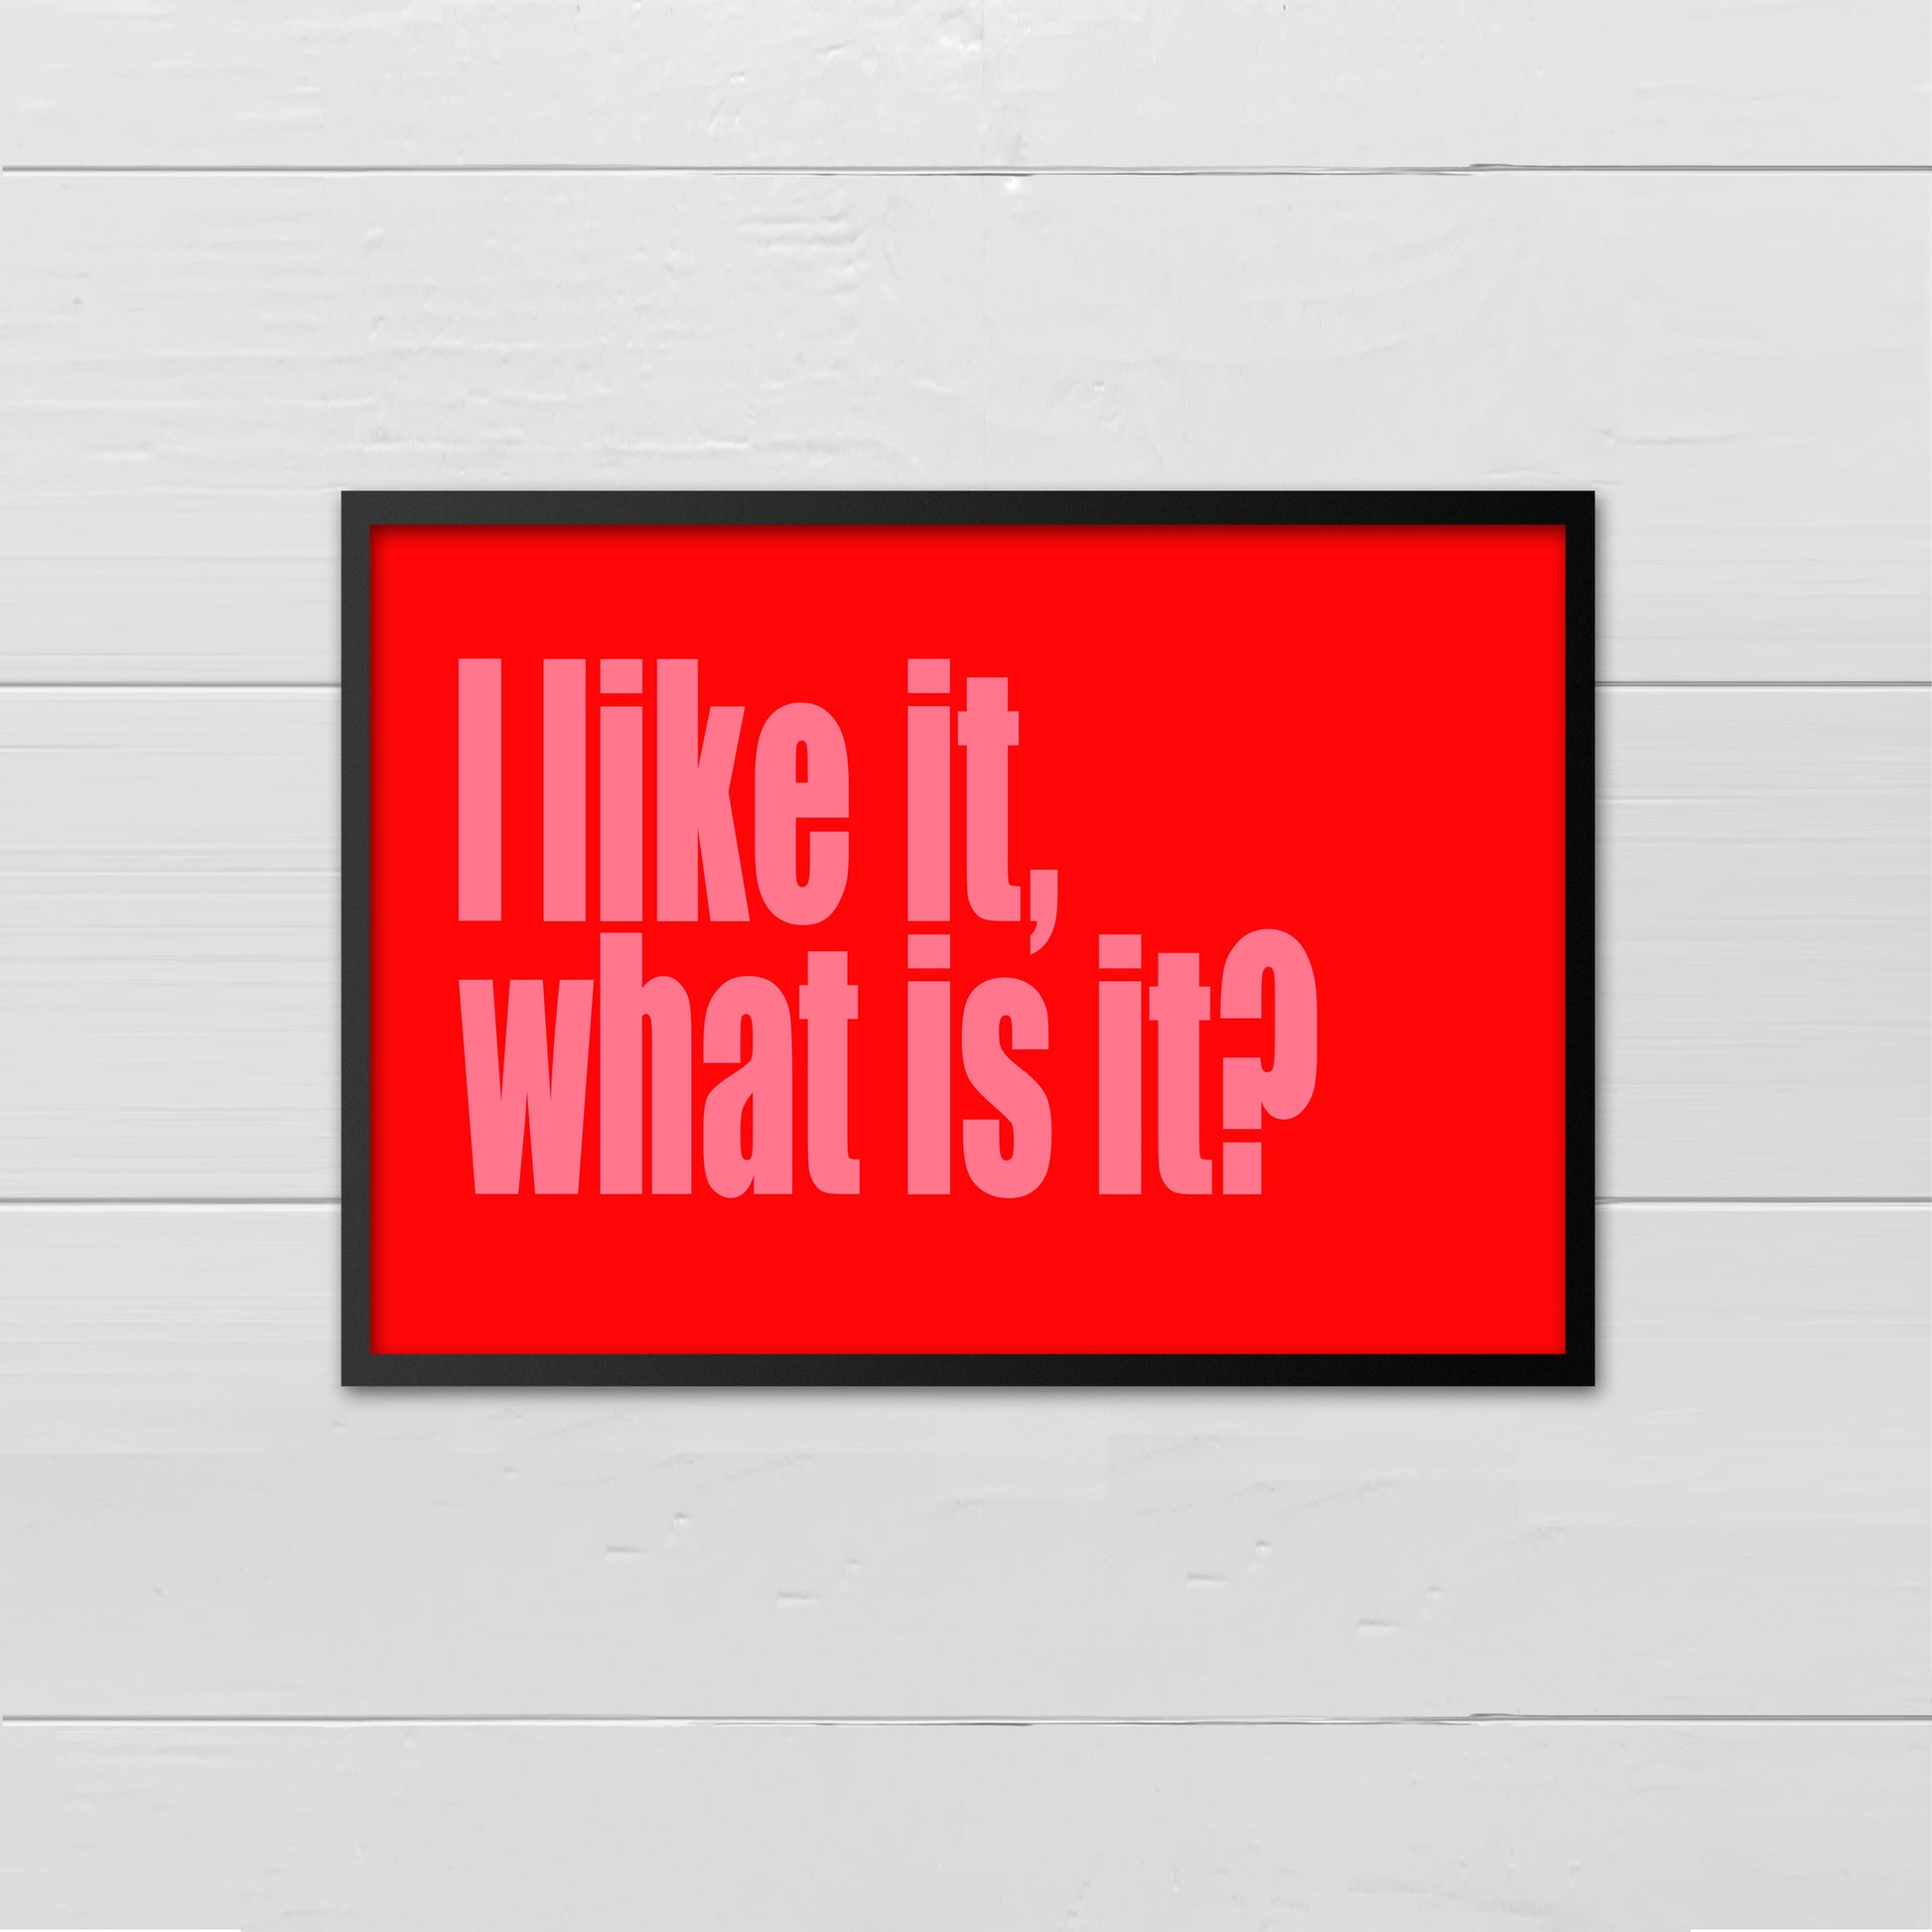 I like it what is it, giclee art print, landscape in a bold and modern IIMPACT type face; pink text on red ground